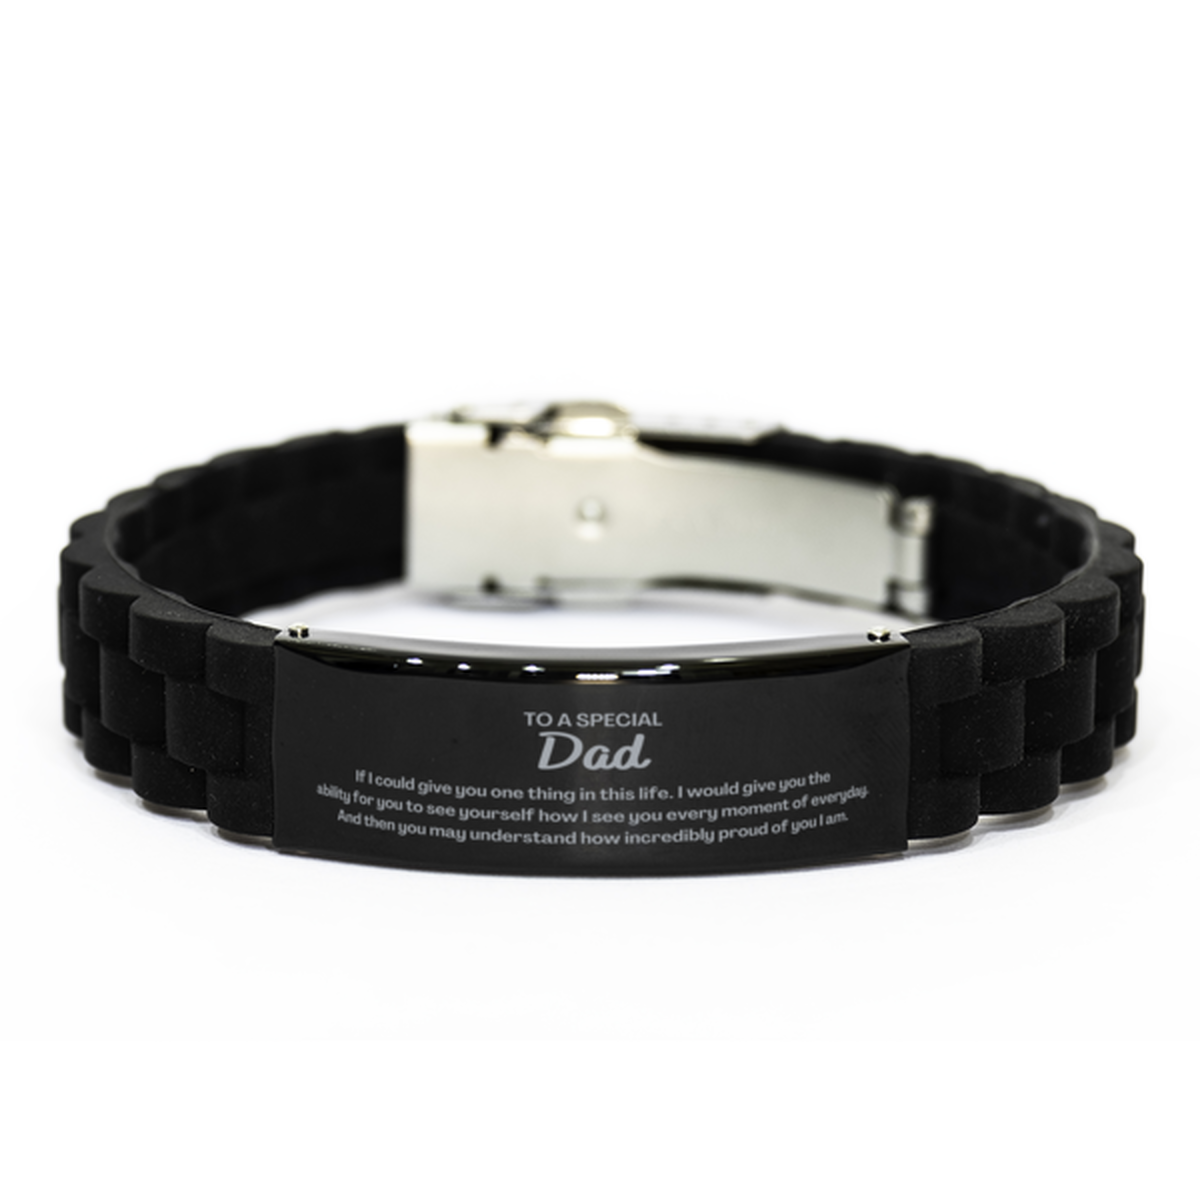 To My Dad Black Glidelock Clasp Bracelet, Gifts For Dad Engraved, Inspirational Gifts for Christmas Birthday, Epic Gifts for Dad To A Special Dad how incredibly proud of you I am